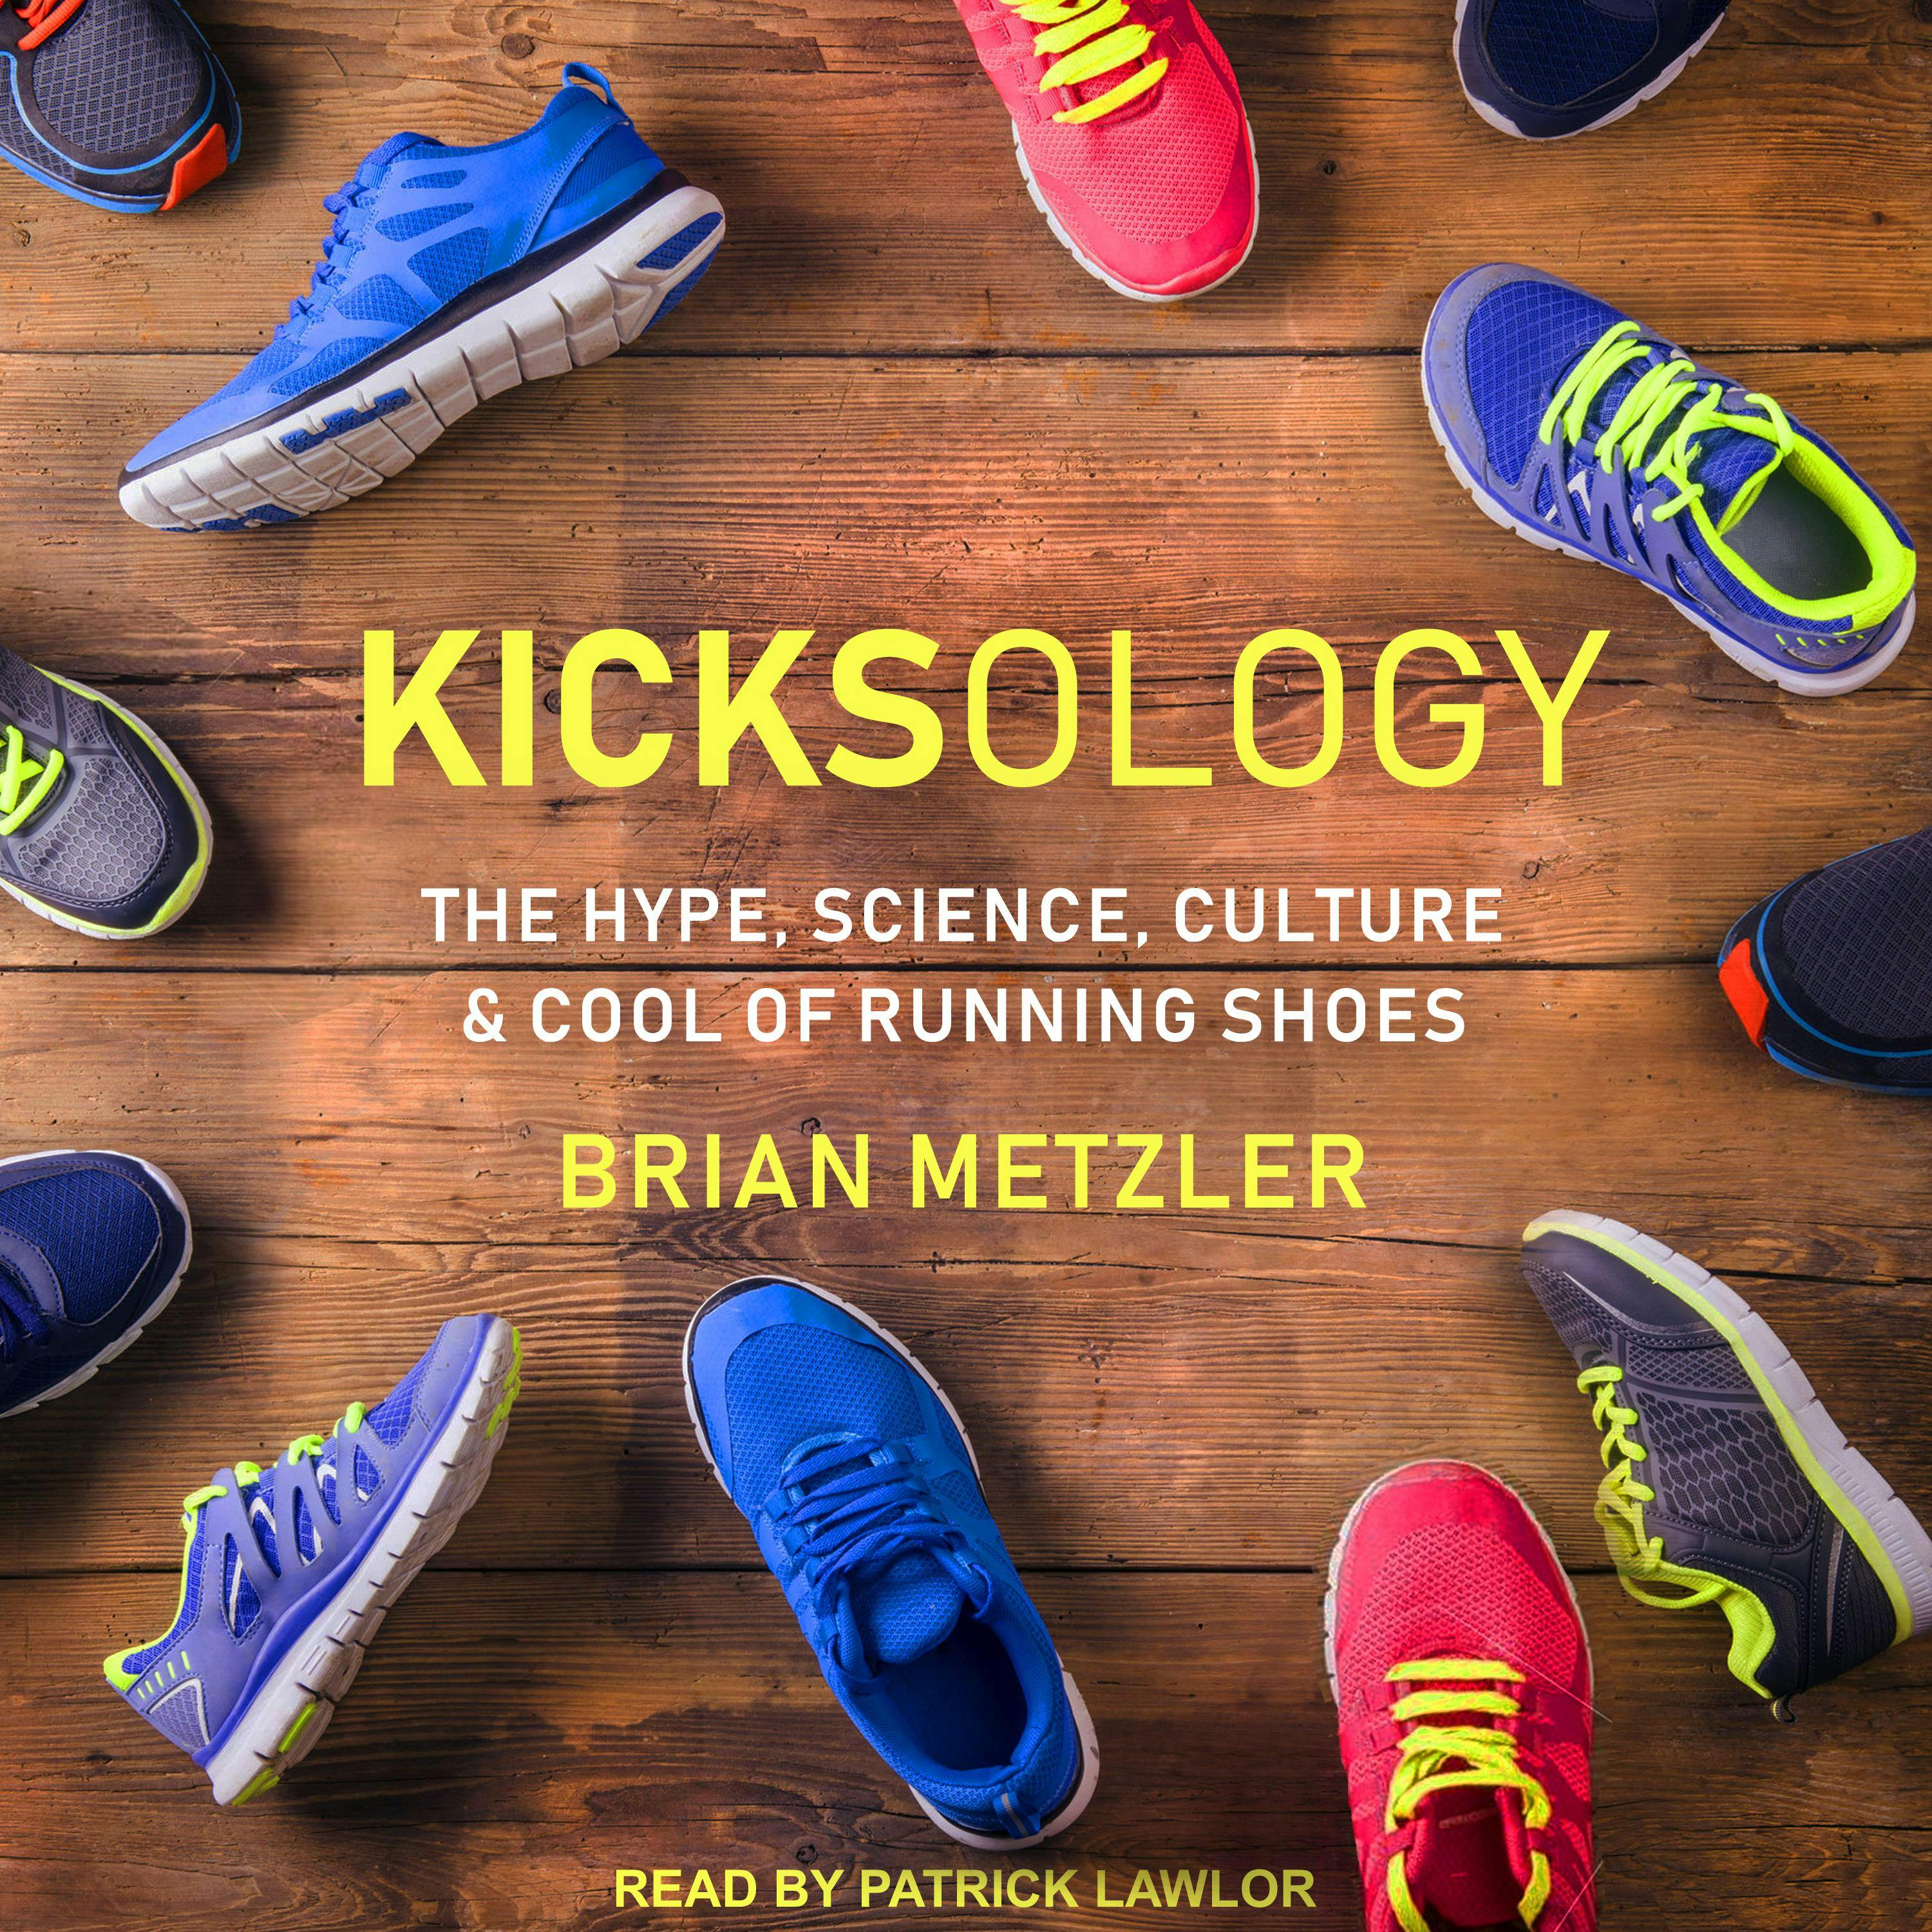 Kicksology: The Hype, Science, Culture & Cool of Running Shoes - Brian Metzler